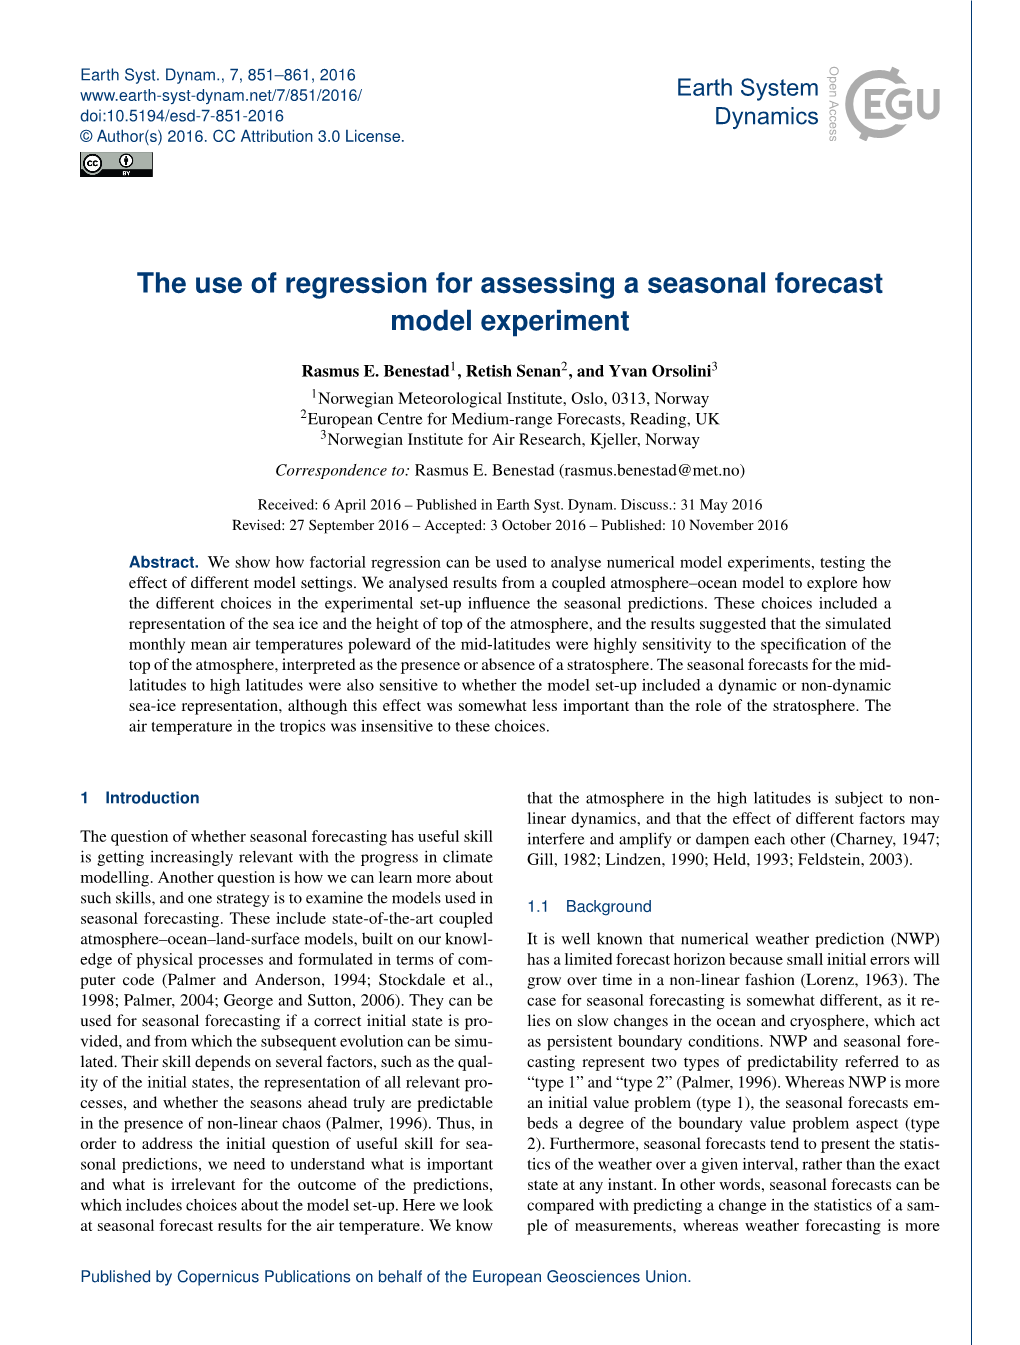 The Use of Regression for Assessing a Seasonal Forecast Model Experiment